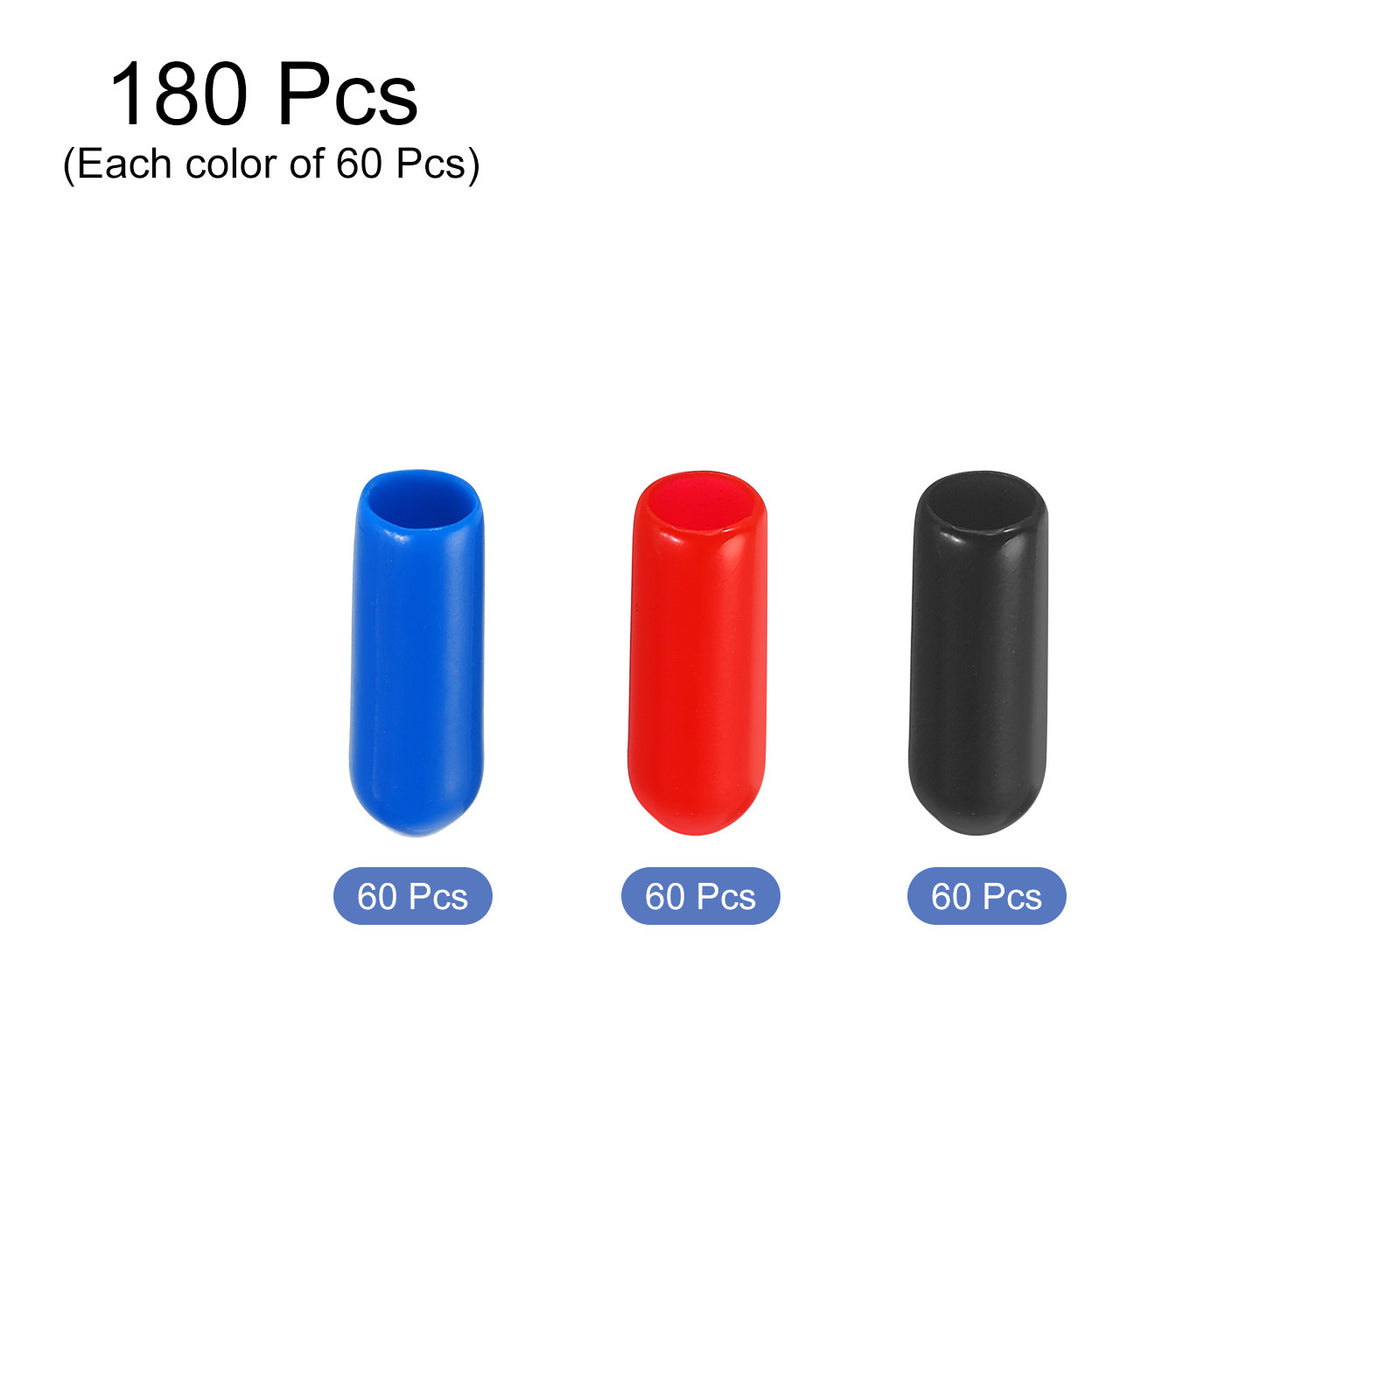 uxcell Uxcell 180pcs Rubber End Caps 4.5mm ID Vinyl PVC Round Tube Bolt Cap Cover Screw Thread Protectors, Black Red Blue